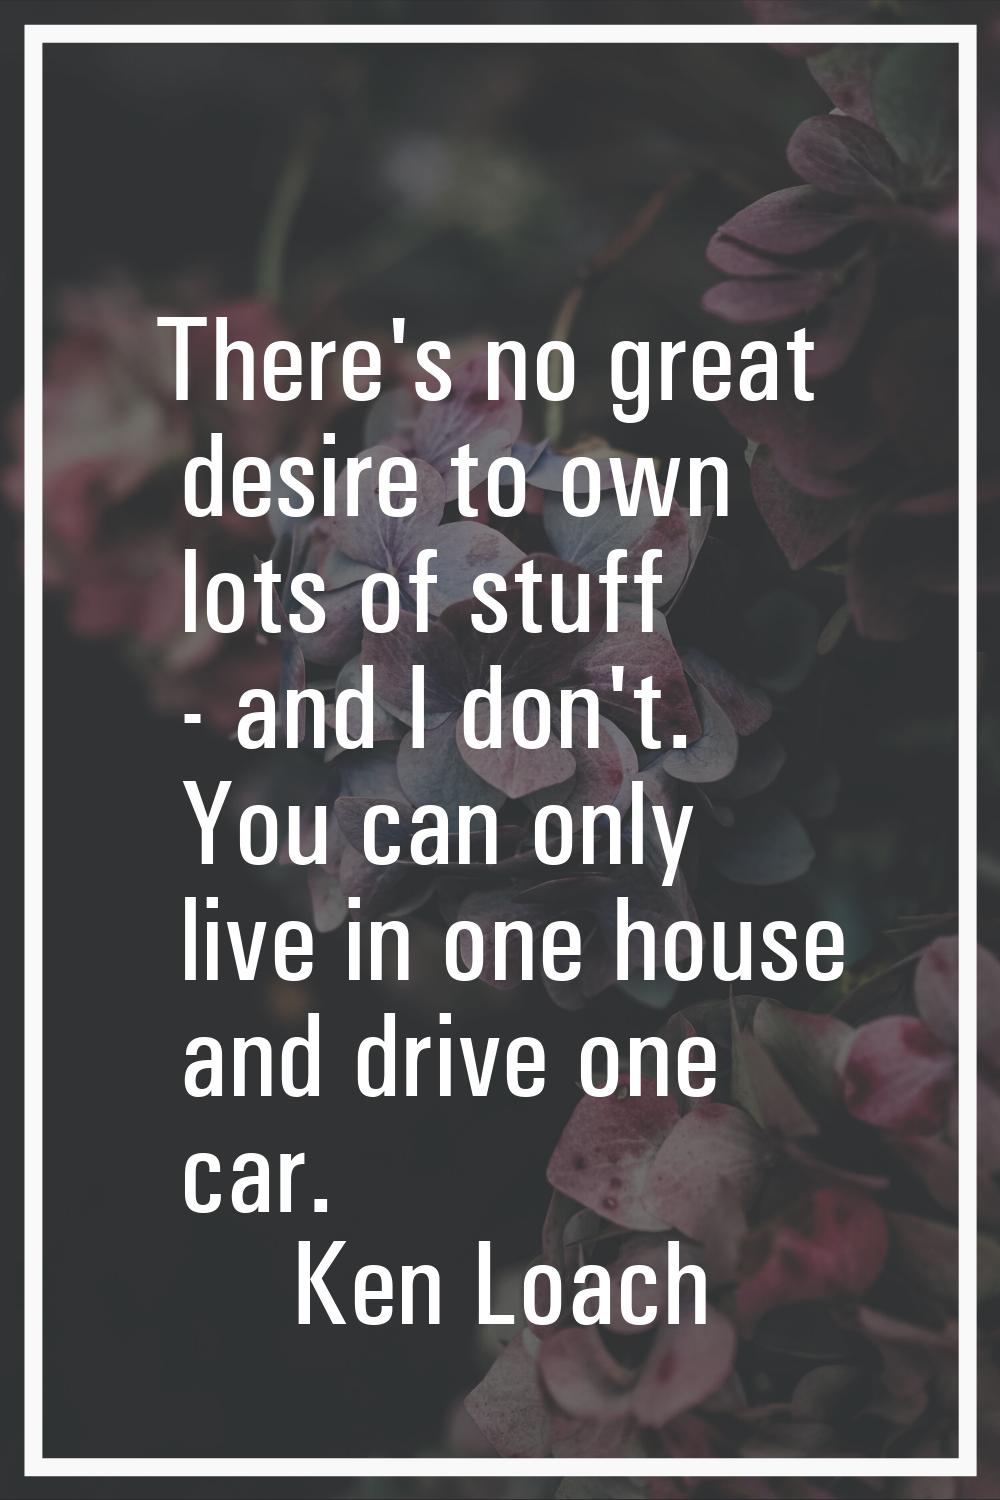 There's no great desire to own lots of stuff - and I don't. You can only live in one house and driv